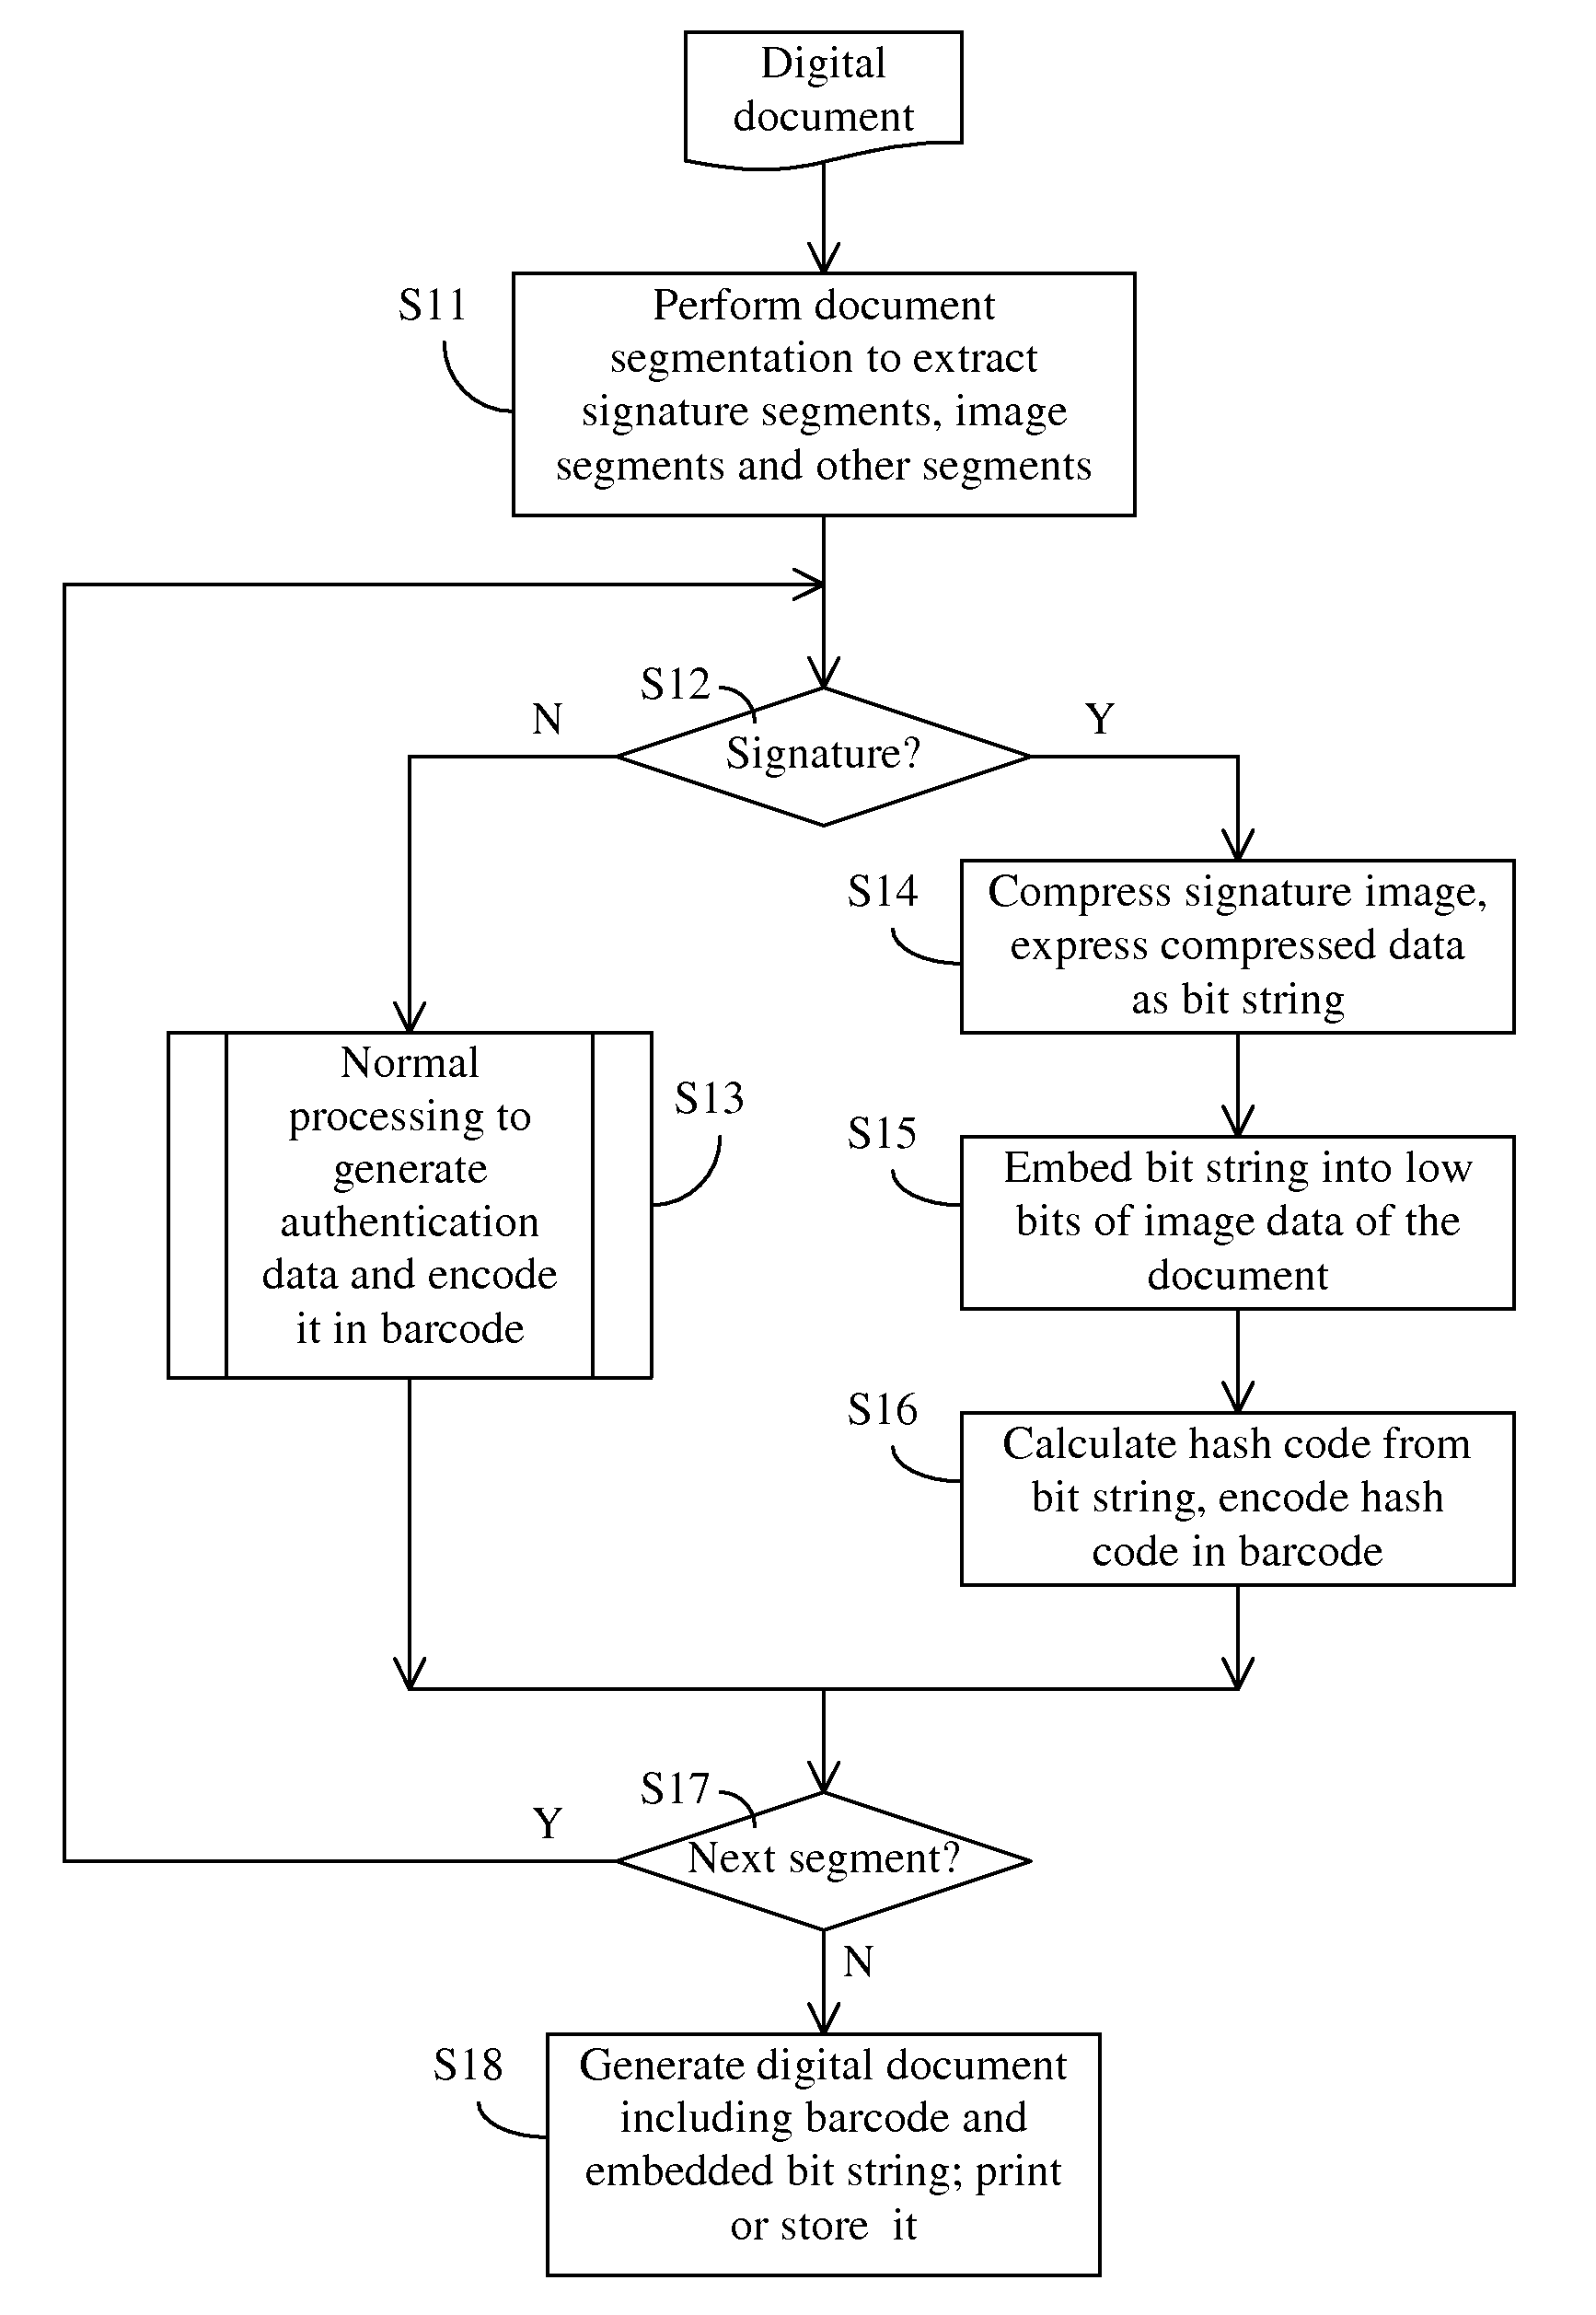 Method of self-authenticating a document while preserving critical content in authentication data